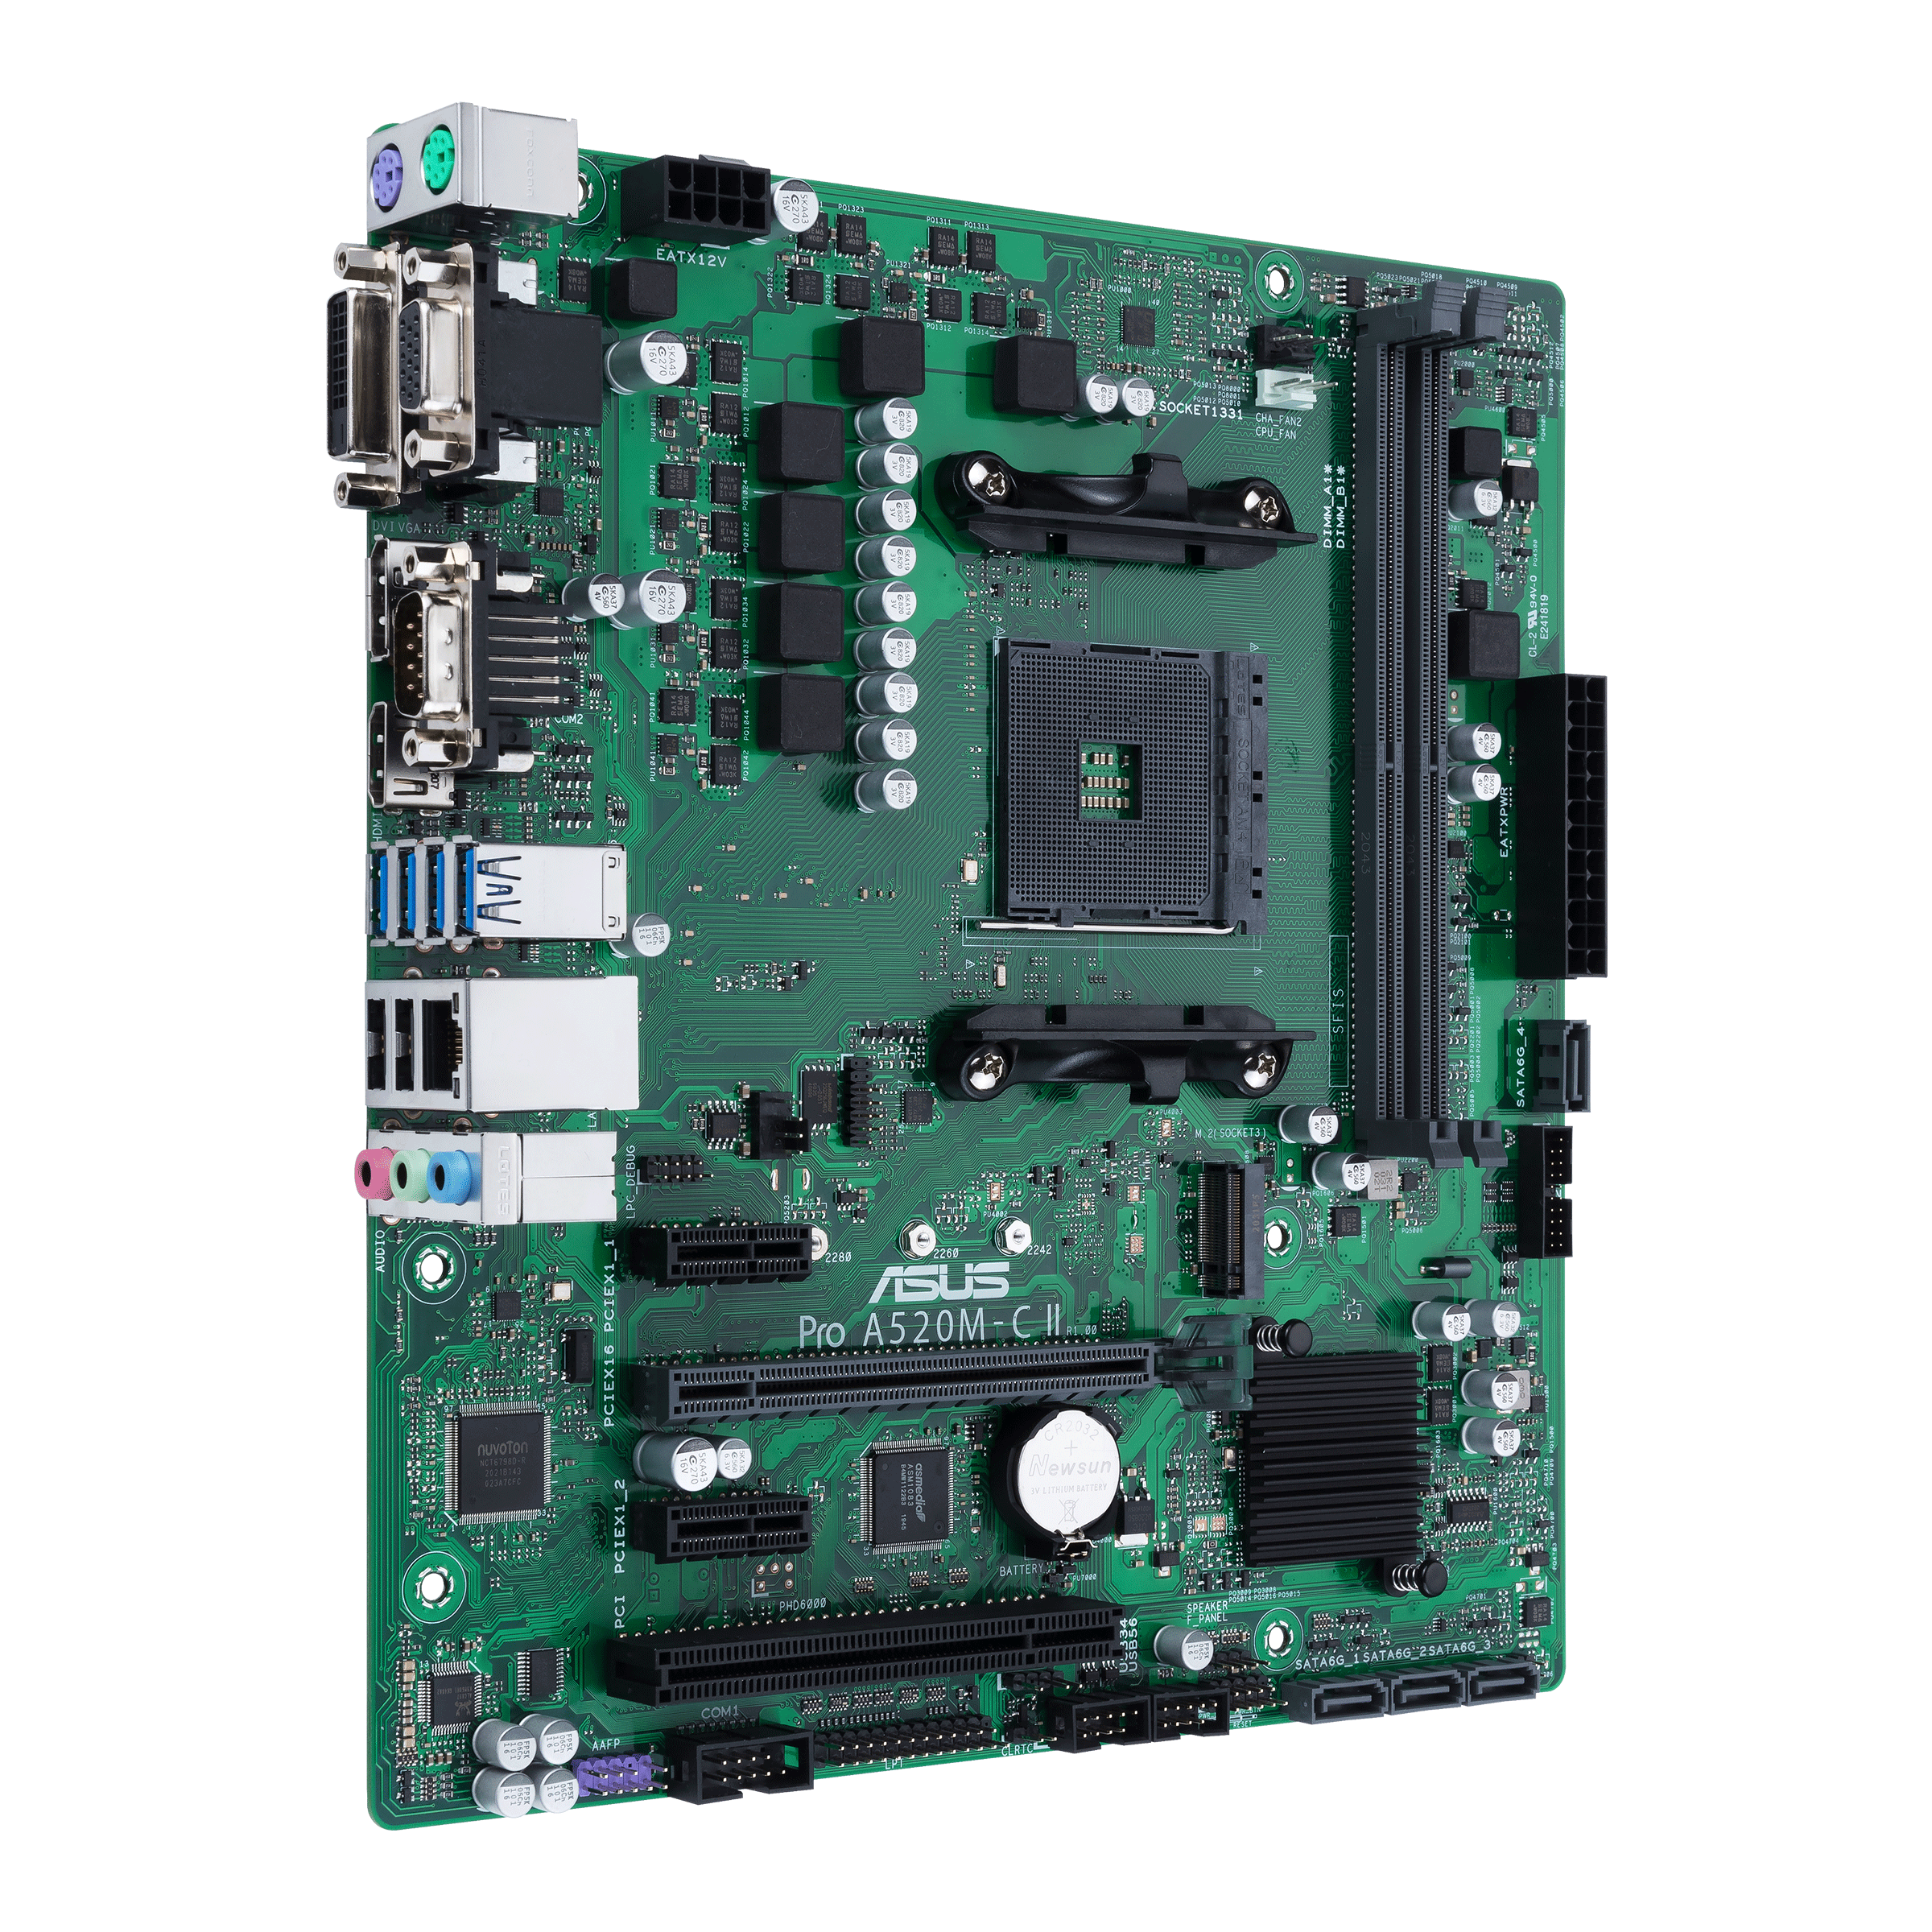 Pro A520M-C II/CSM｜Motherboards｜ASUS USA